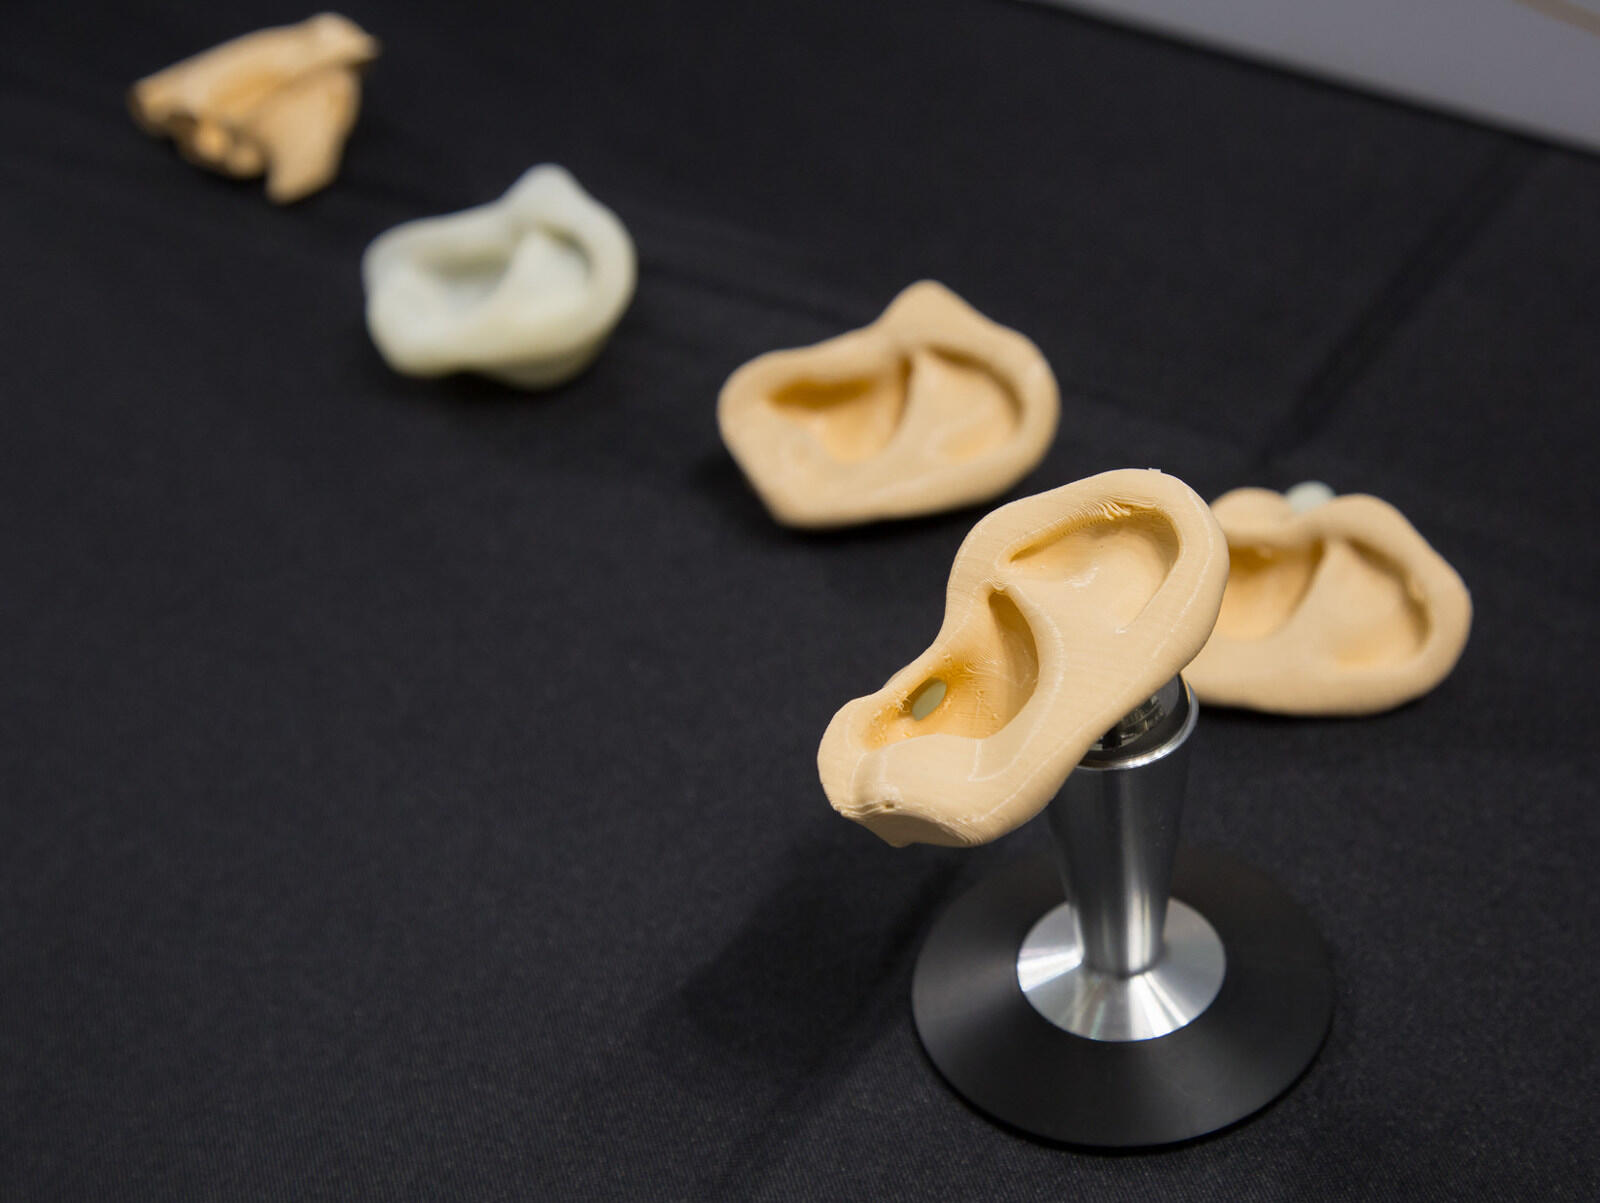 A team of mechanical and nuclear engineering students presented their 3-D-printed model of the ear canal at the 2017 Capstone Design Expo.